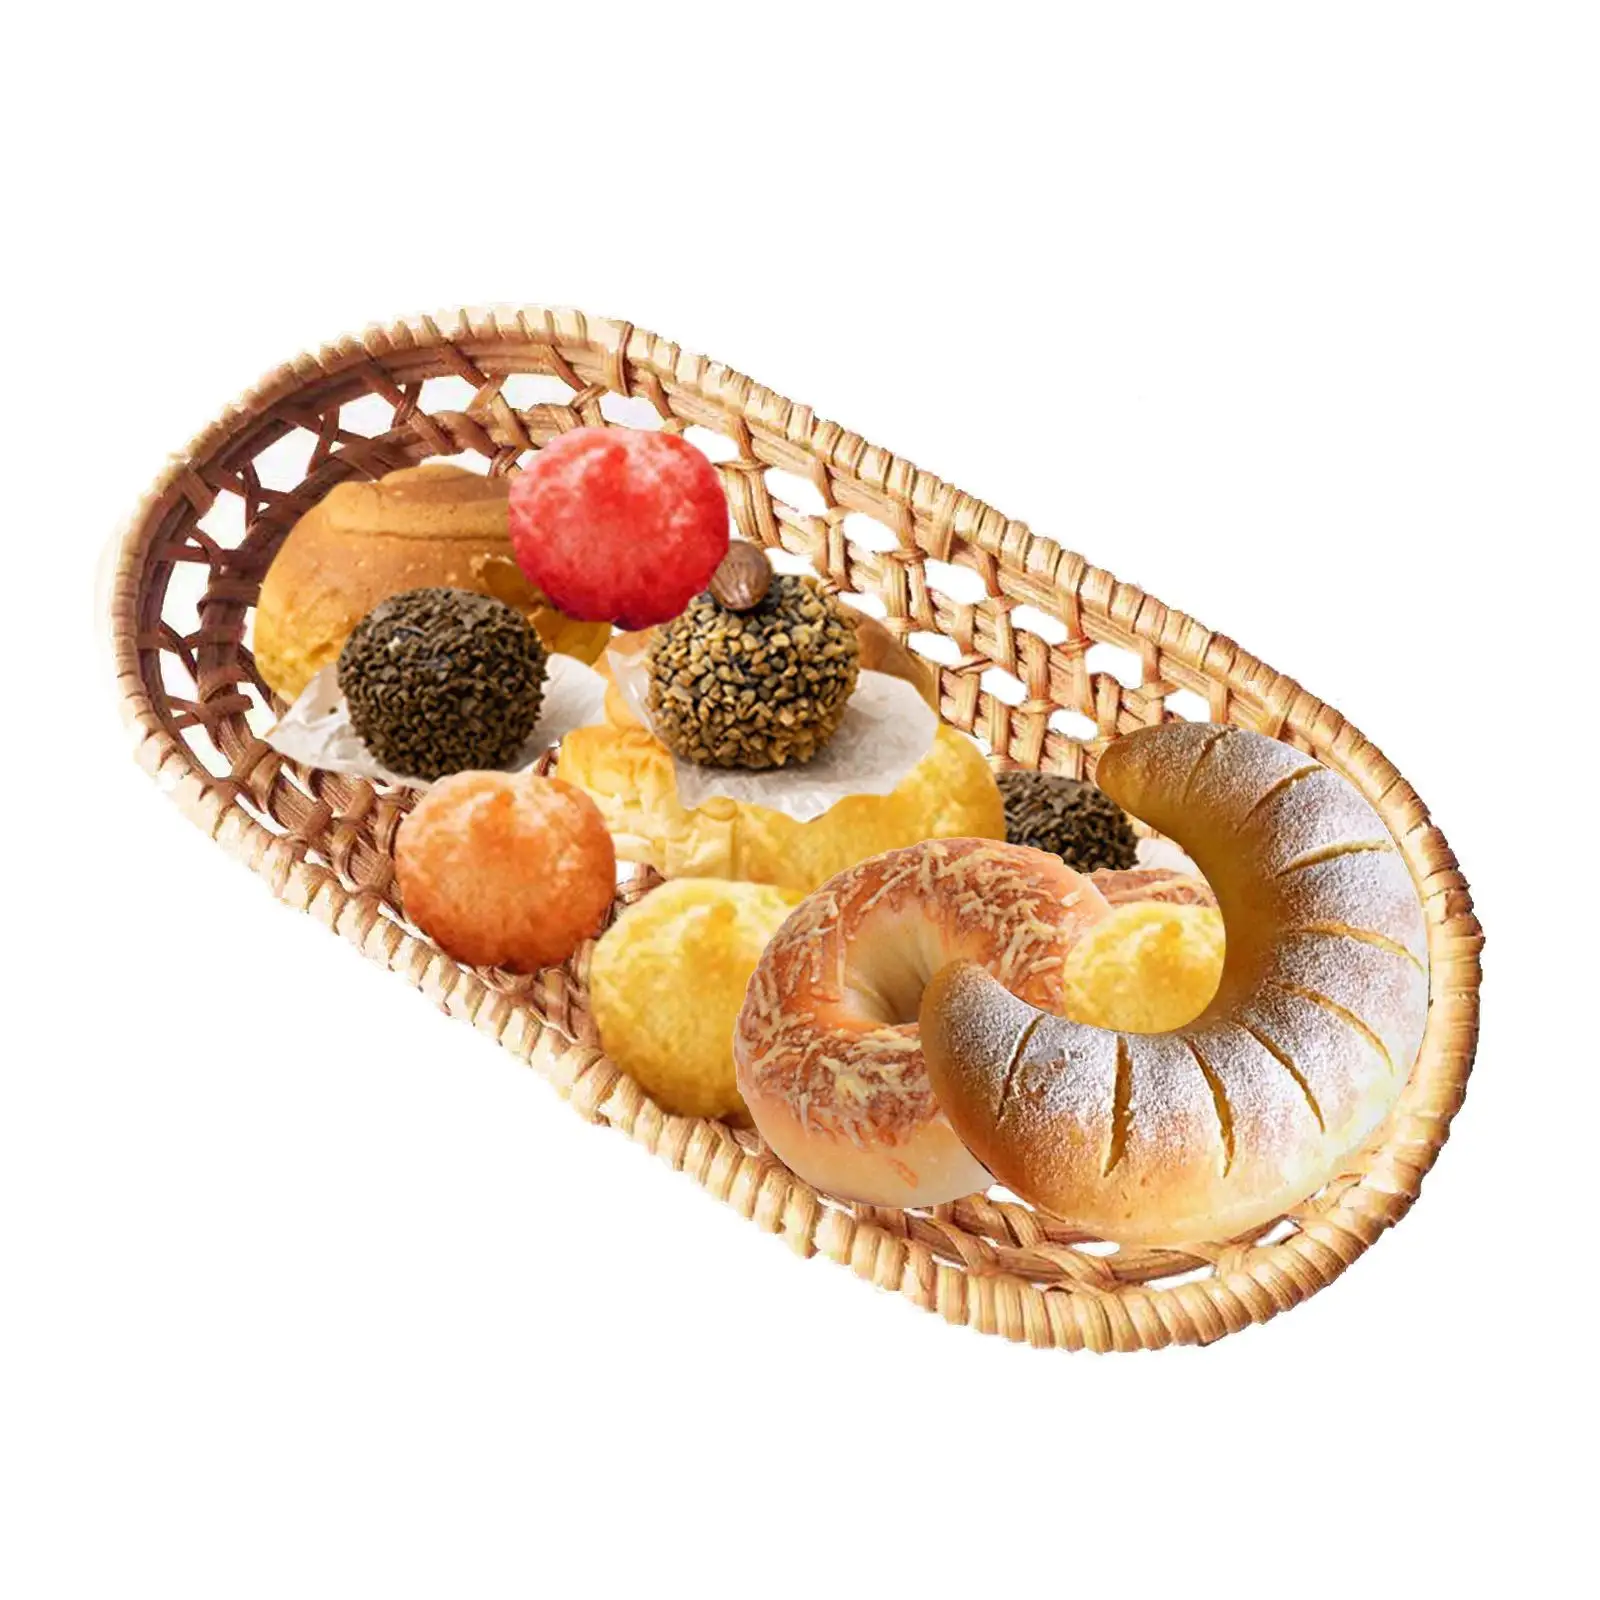 Rattan Baskets Organizer Tabletop Food Serving Tray Wicker Woven Basket for Fruits Breakfast Vegetables Outdoor Hotel